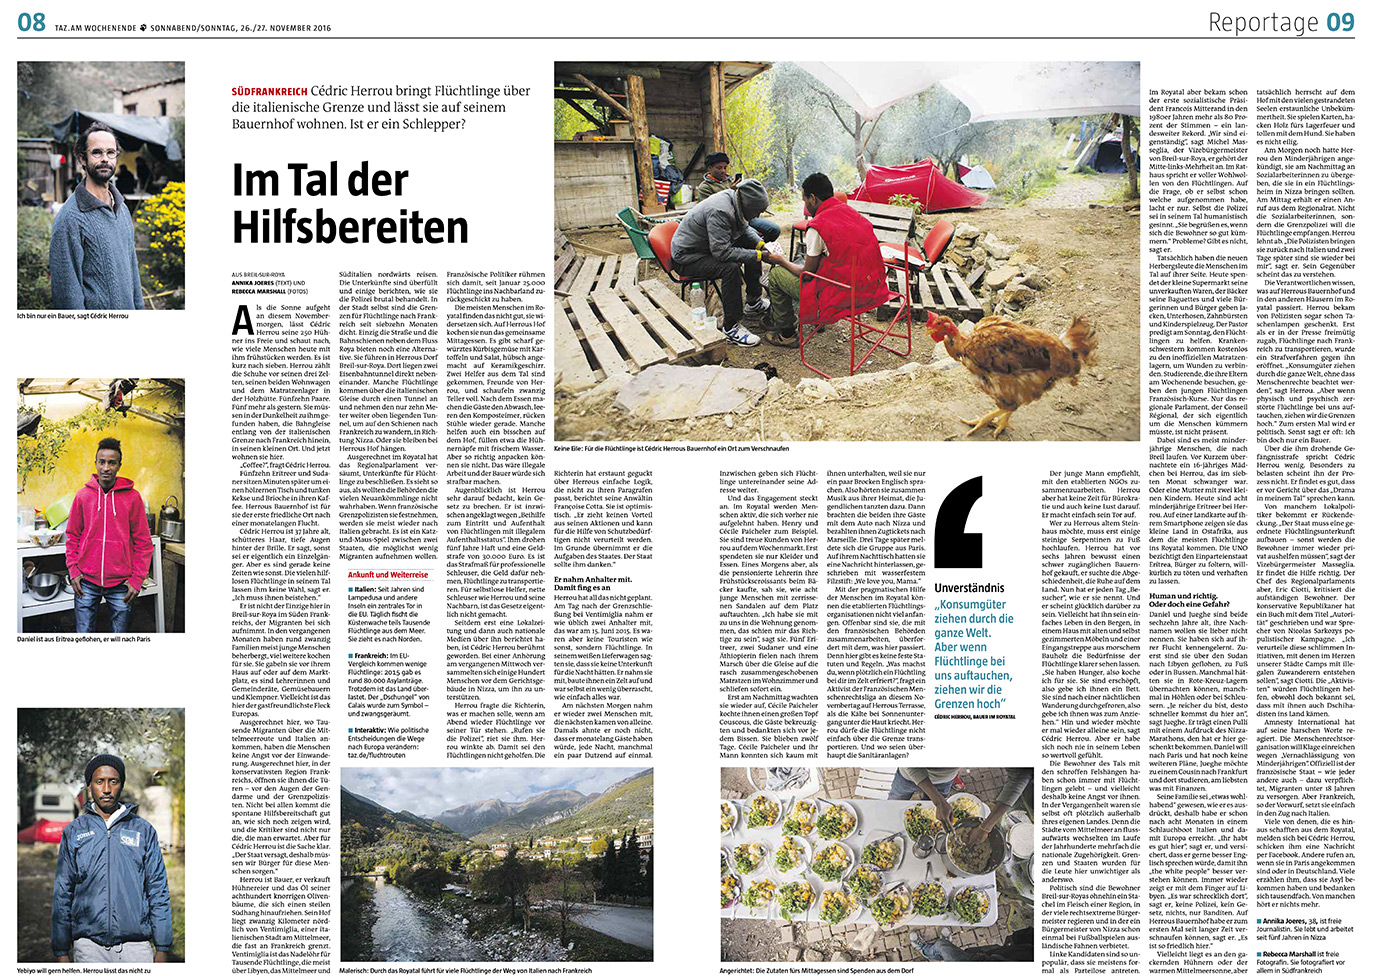 Tearsheet showing text and 6 photographs on pages 8-9 of Taz am Wochenende weekend newspaper